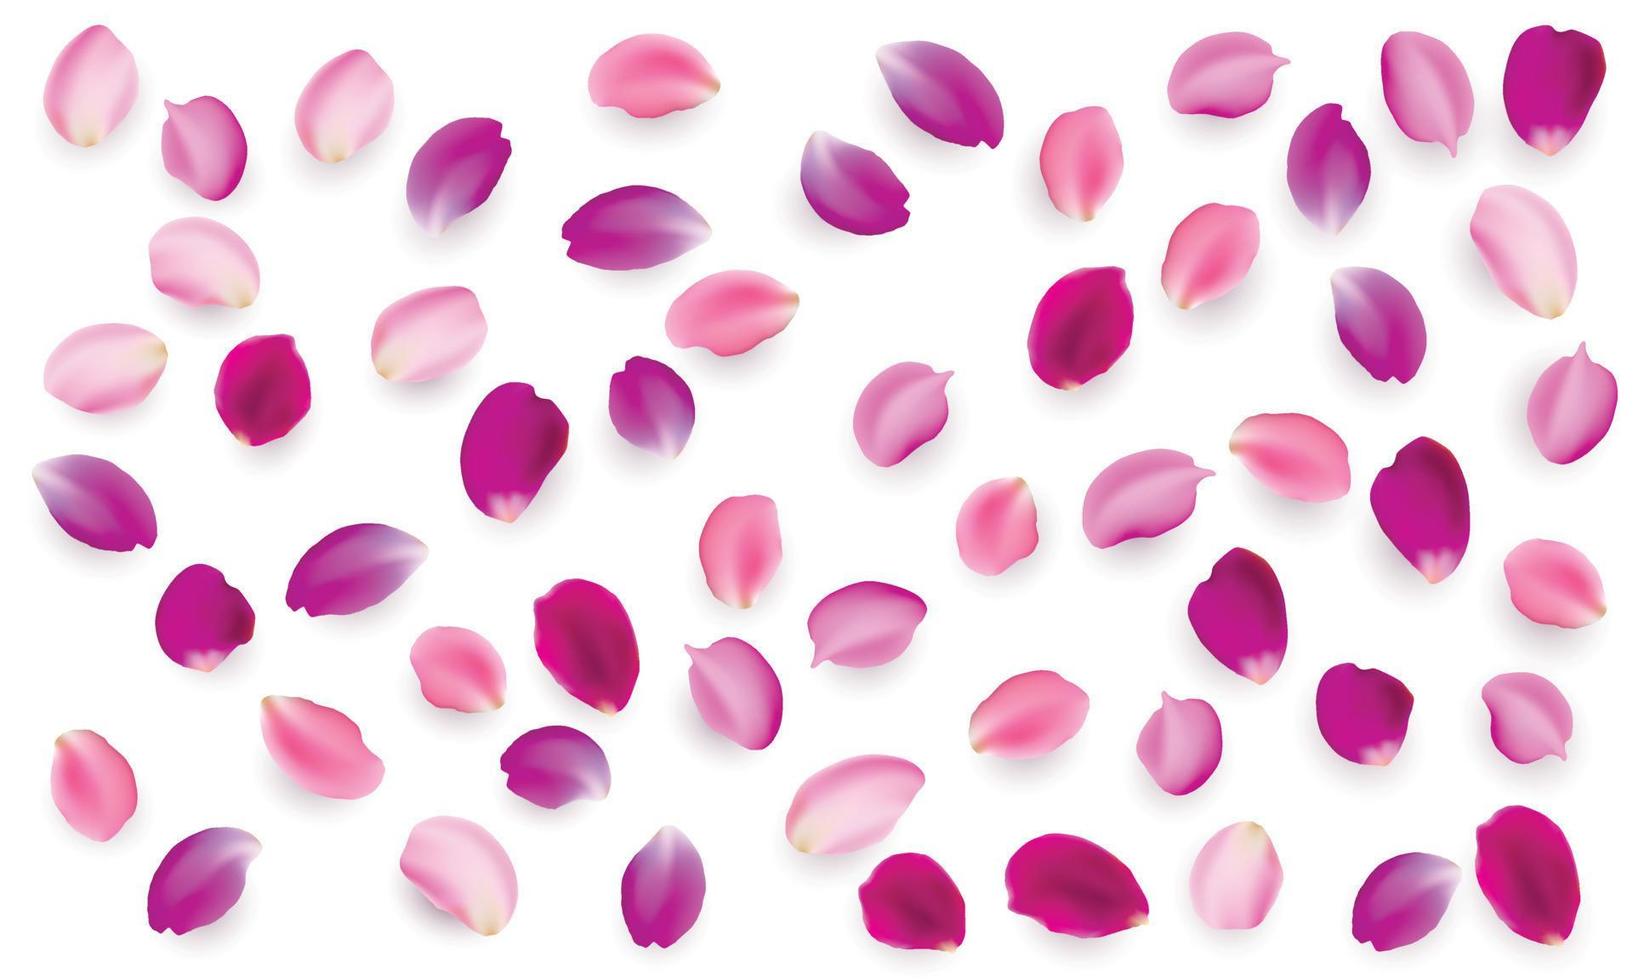 Realistic vector elements set of rose petals. purple, lilac and pink petals of rose flower